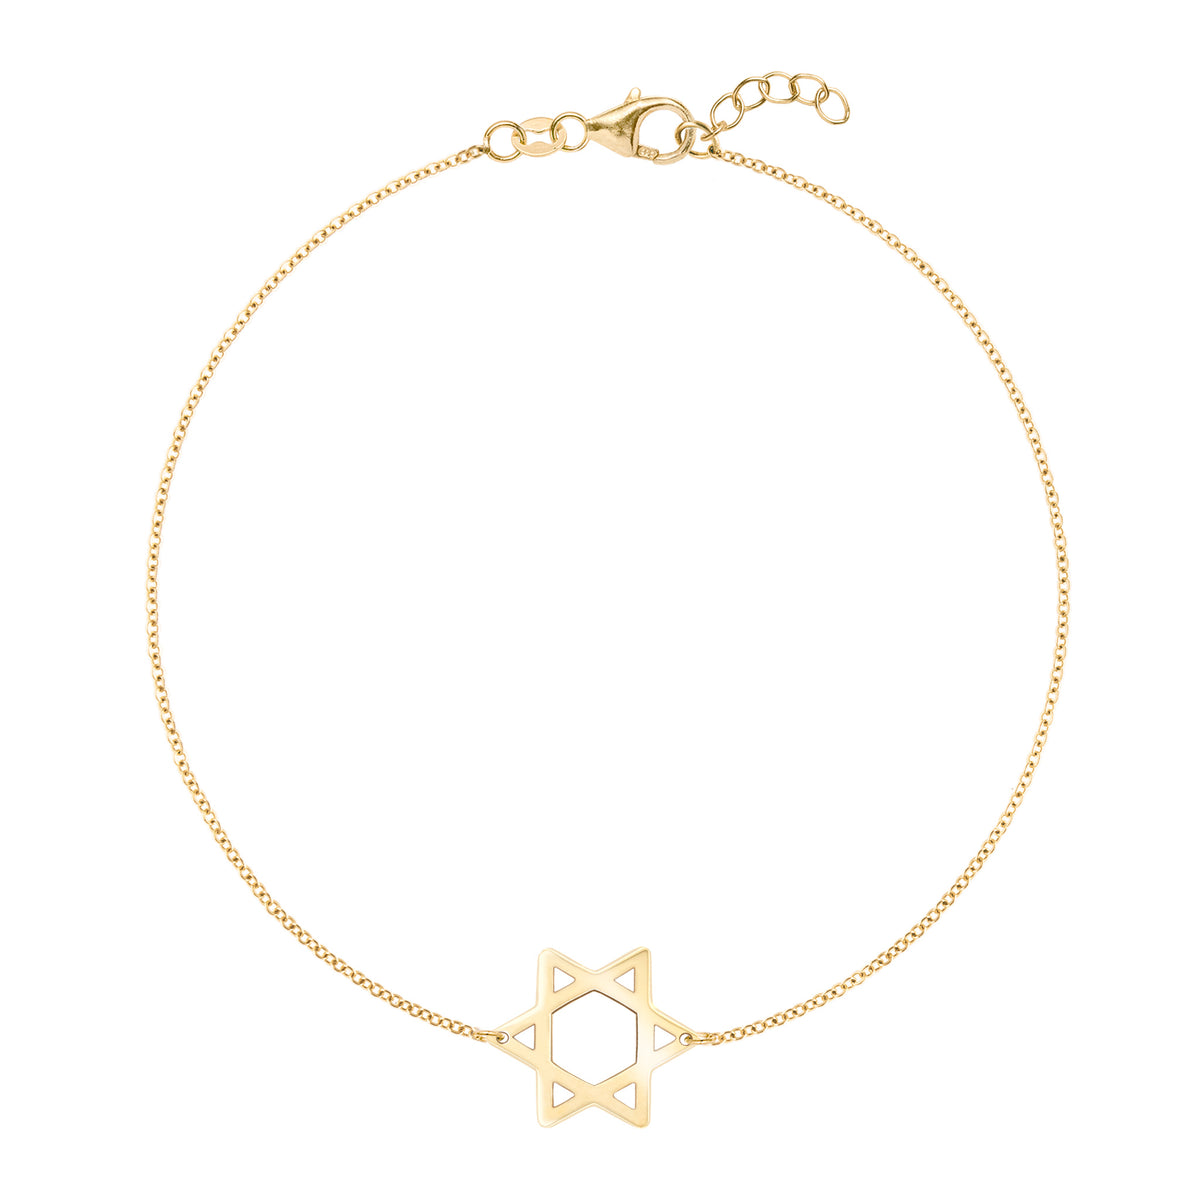 Star of David Bracelet With Diamonds in 14k Gold - Yellow, Rose or Whi